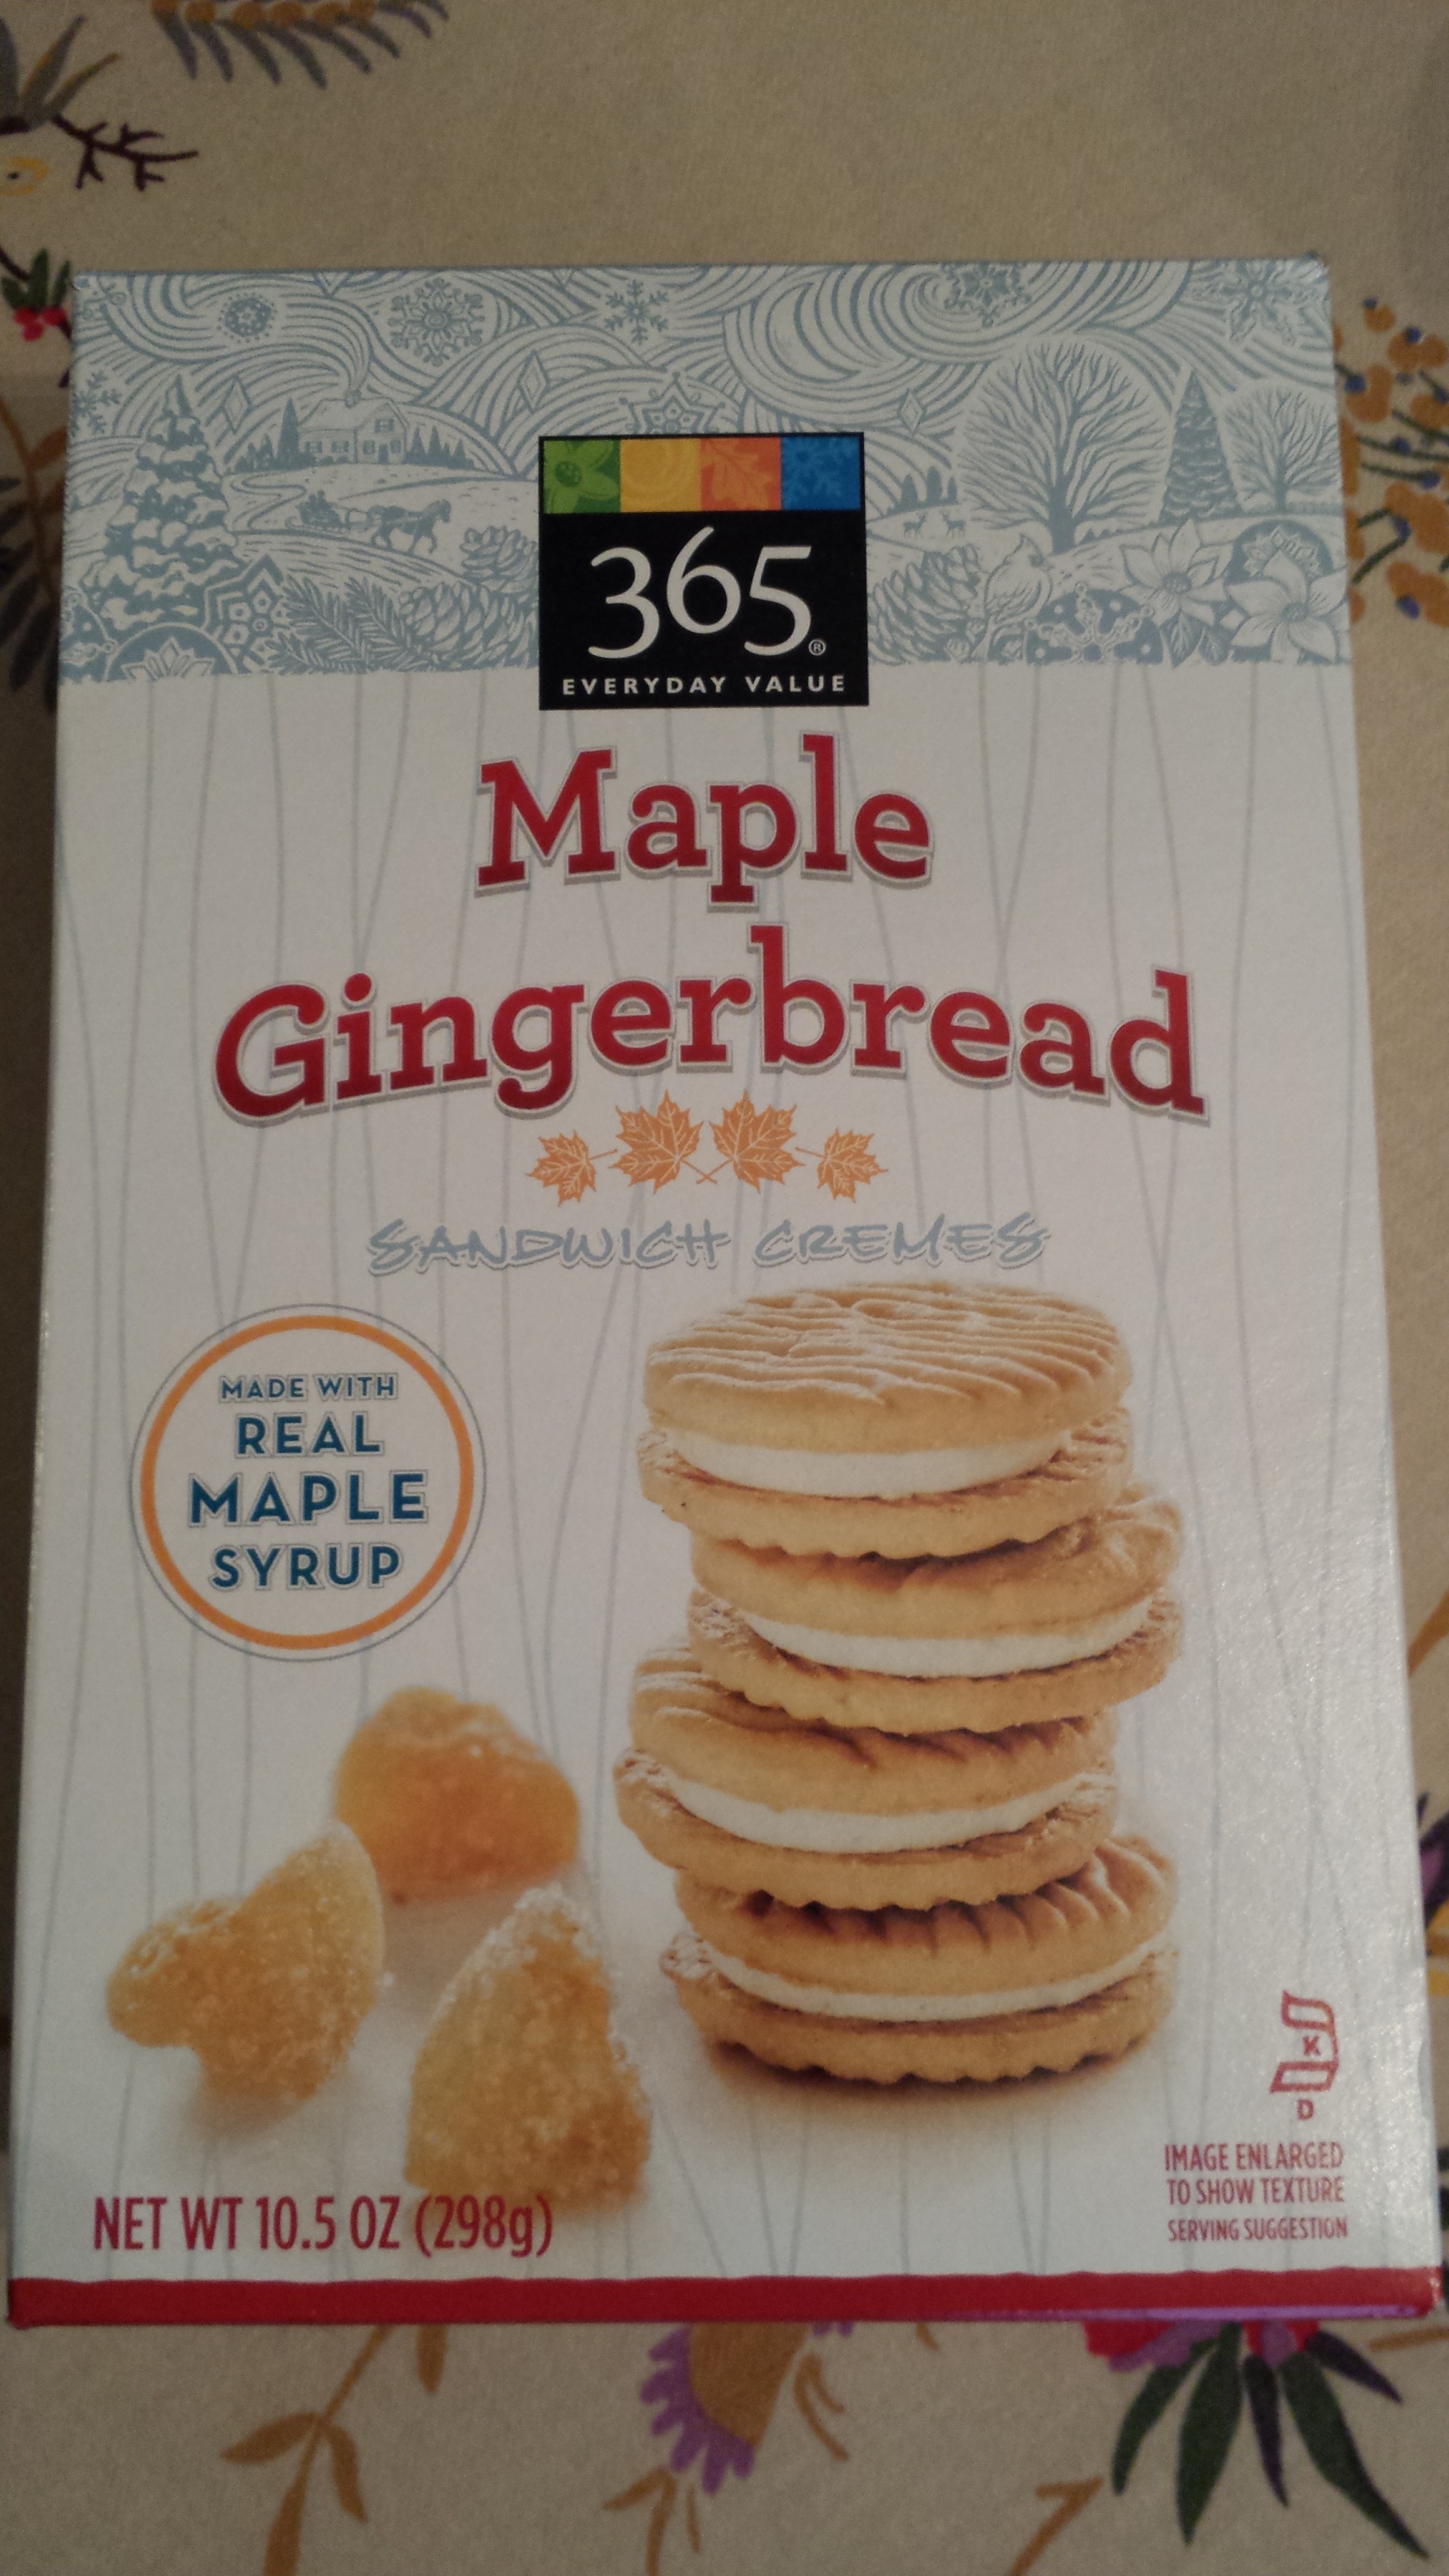 Whole Foods Market's 365 brand seasonal Maple Gingerbread cookies.   (Photo Credit: Adroit Ideals)